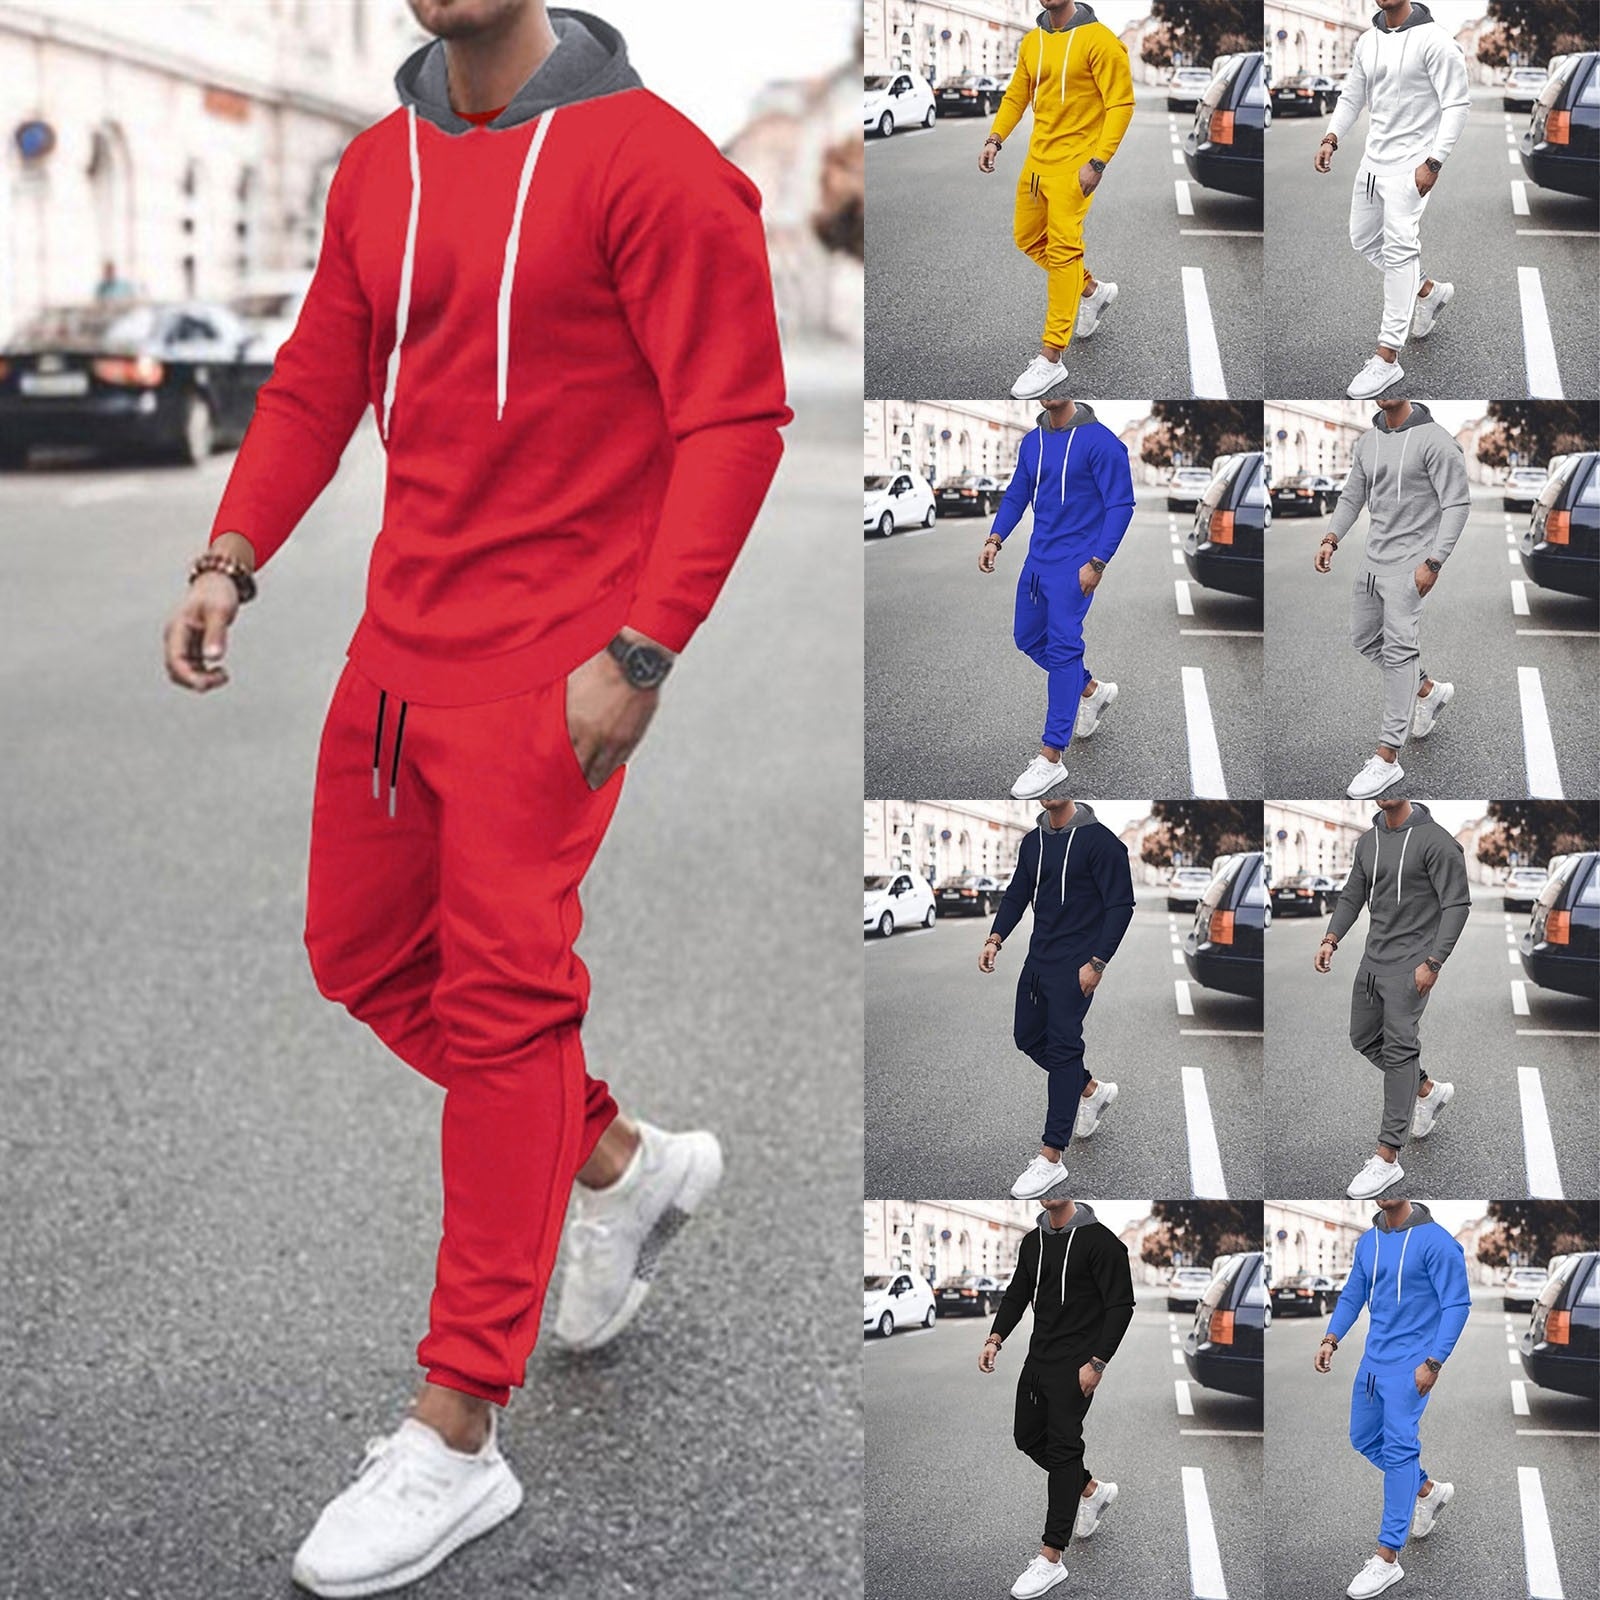 Men's Casual Sweater shirts Sweatpants Street wear Tracksuit Jogger Sportswear Pullover Solid Color  Sets